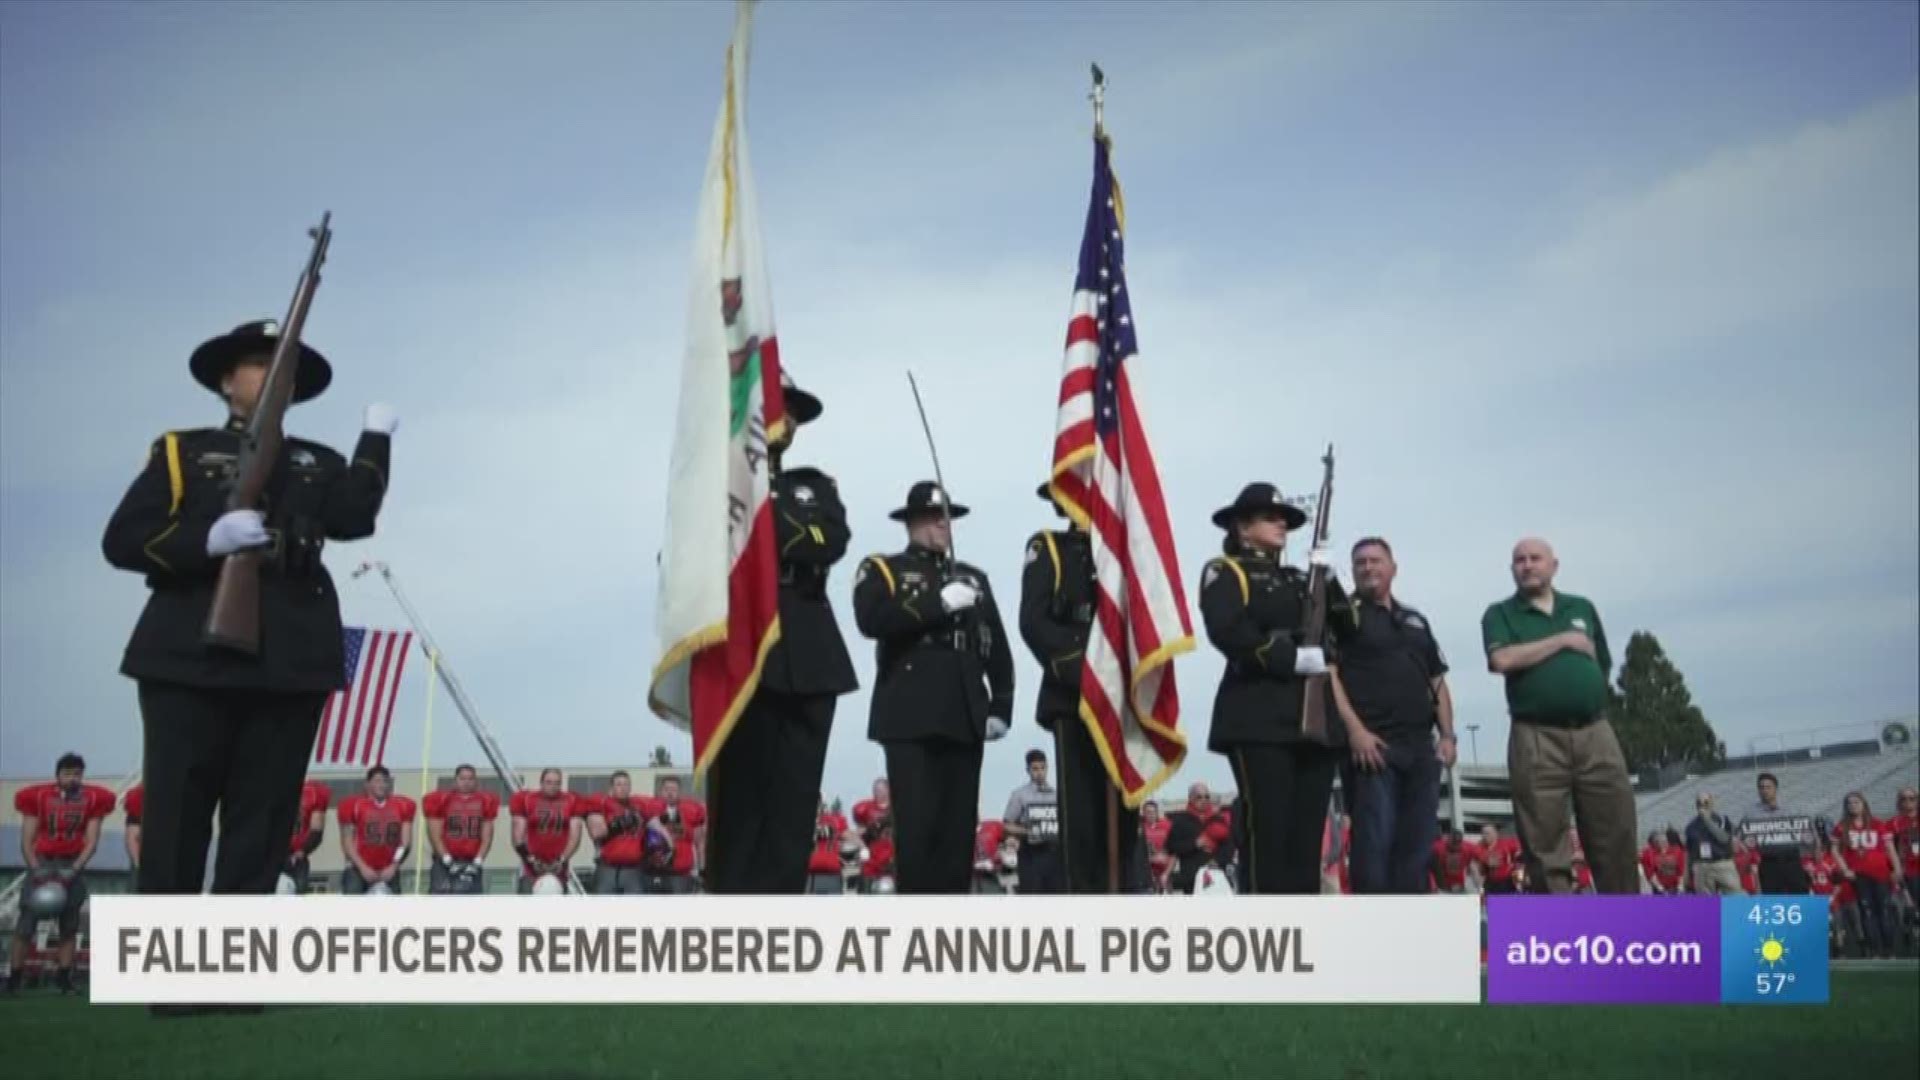 Officers Natalie Corona, Ronil Singh and Deputy Mark Stasyuk were honored Saturday at the 45th Annual Pig Bowl game. The charity football game raises money for local nonprofits and pays tribute to fallen officers. The final score was 24-18 with law enforcement claiming the win.